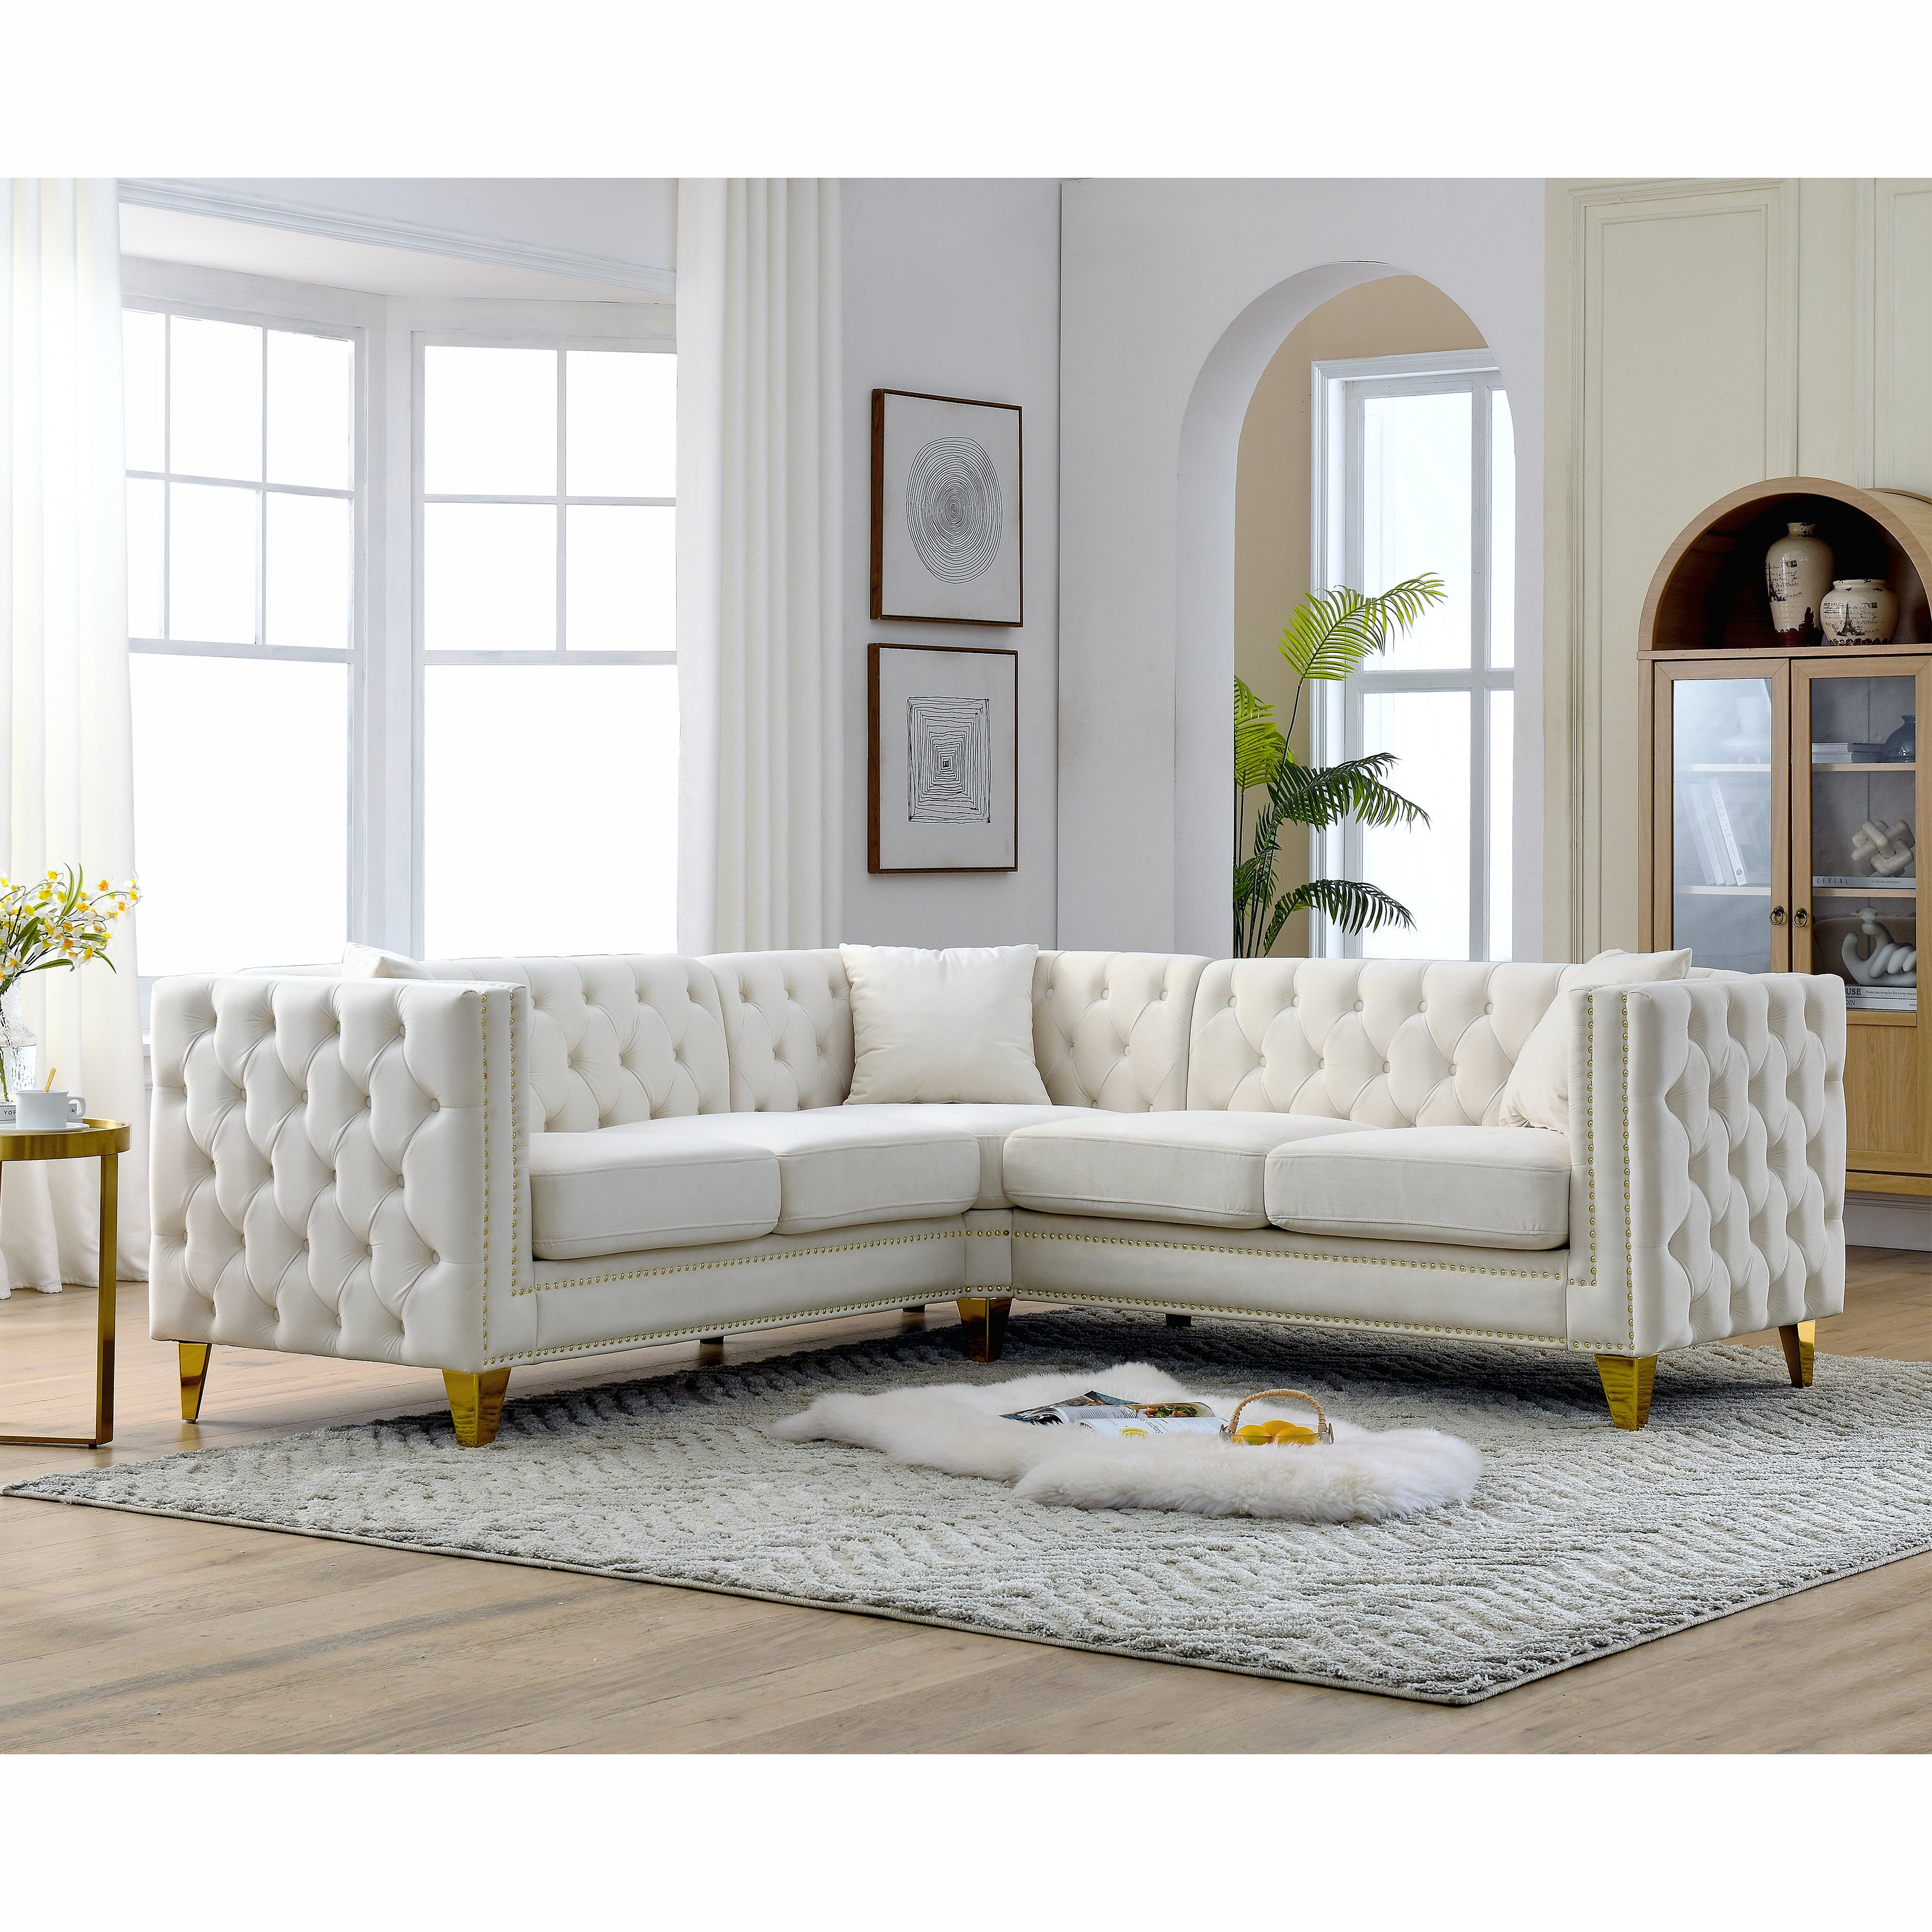 Finley Luxury beige Velvet L-Shaped Sectional Sofa With Golden Metal Legs and Nailhead Trim